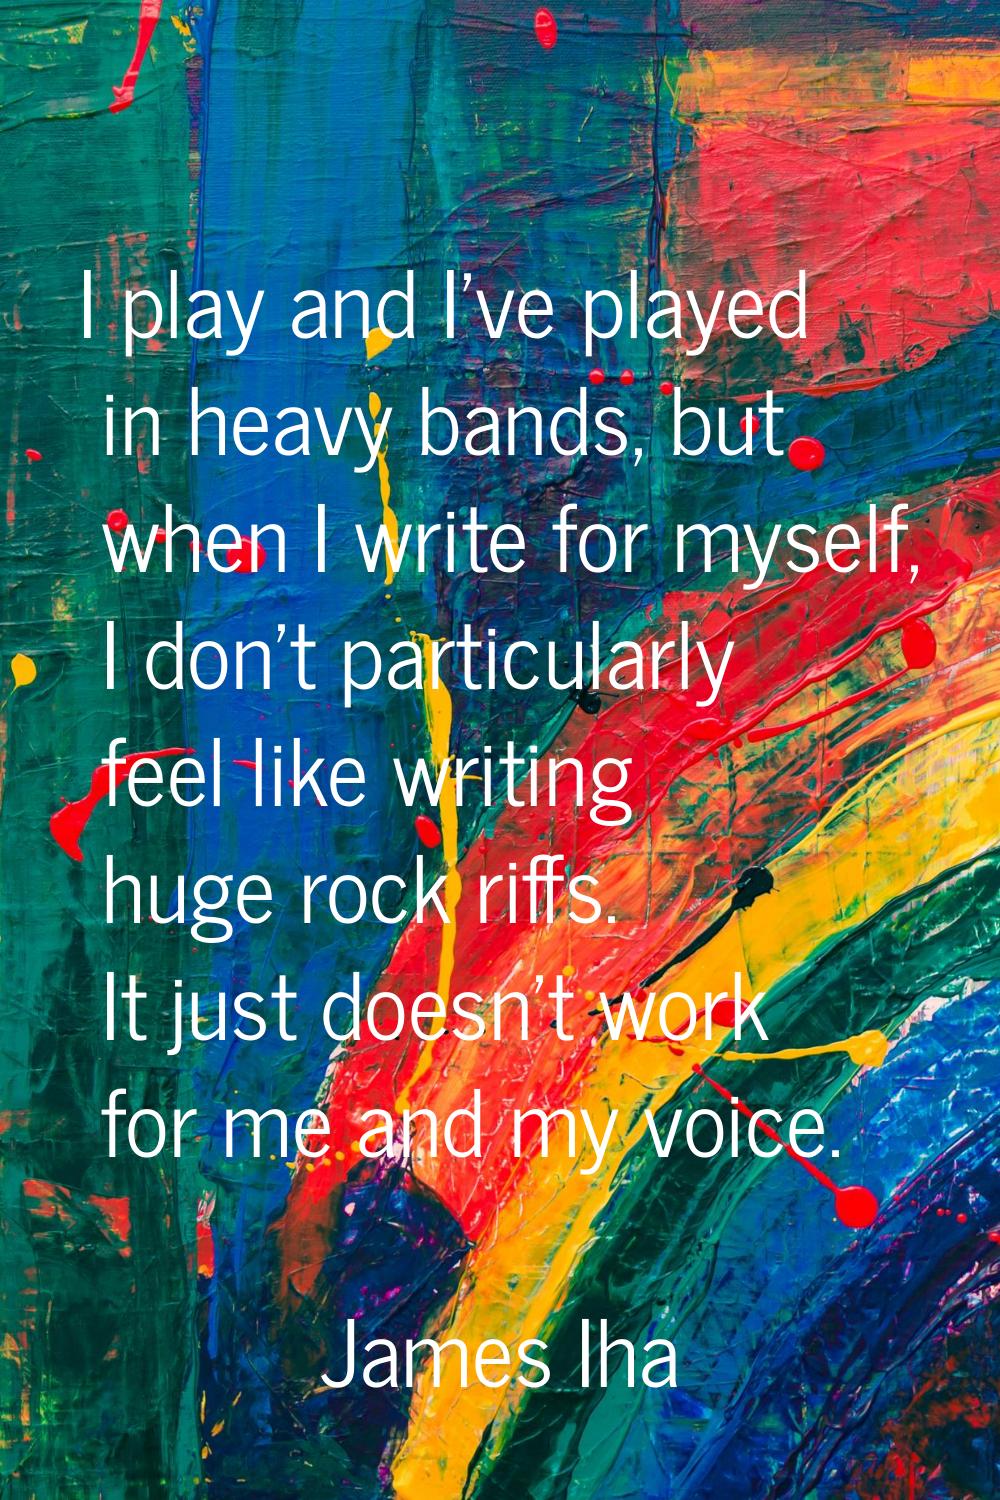 I play and I've played in heavy bands, but when I write for myself, I don't particularly feel like 